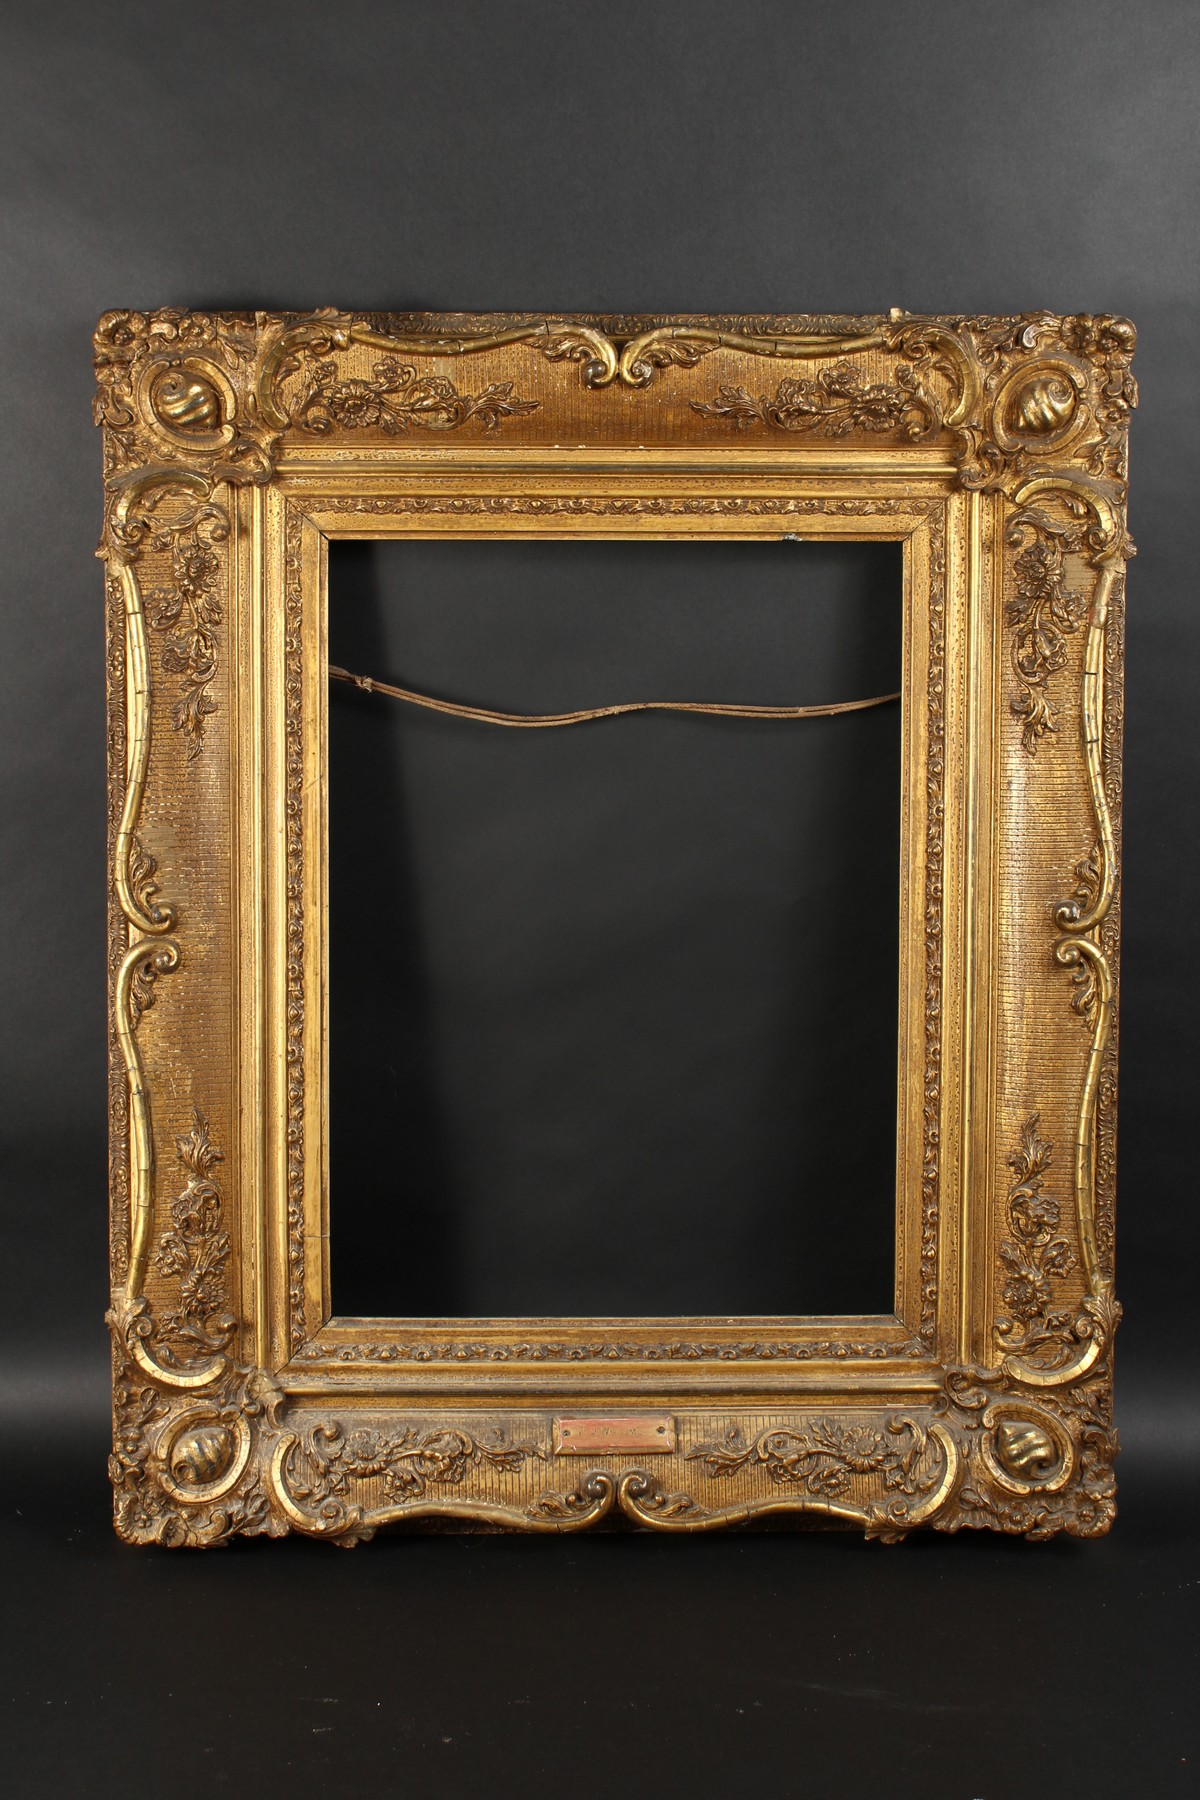 19th Century French Gilt Composition Frame. 20.75" x 15.5" - 52.75cm x 39.5cm. (Rebate Size) - Image 2 of 3